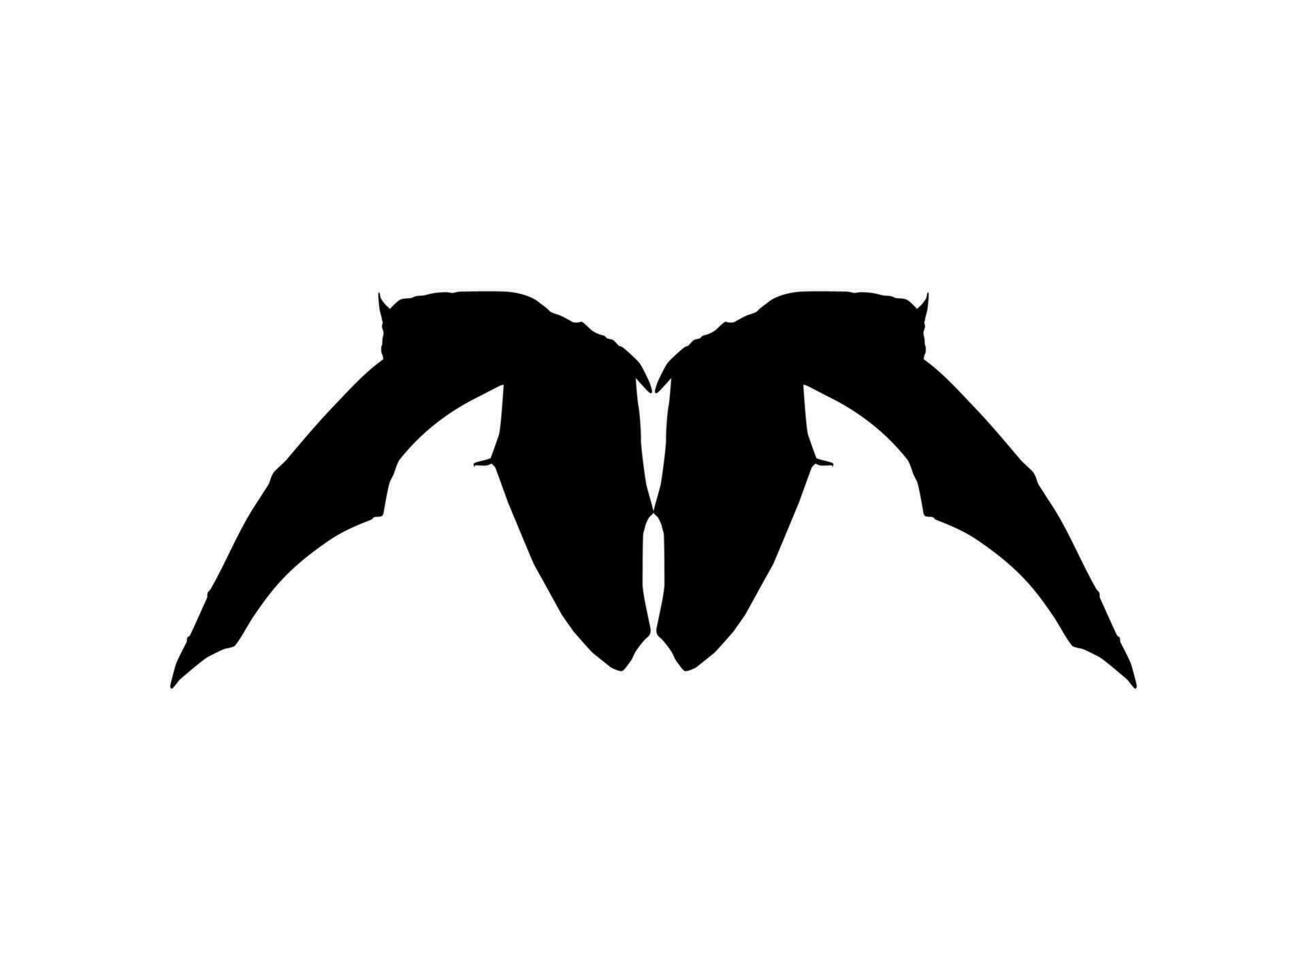 Silhouette of the Pair of Flying Fox or Bat for Art Illustration, Icon, Symbol, Pictogram, Logo, Website, or Graphic Design Element. Vector Illustration